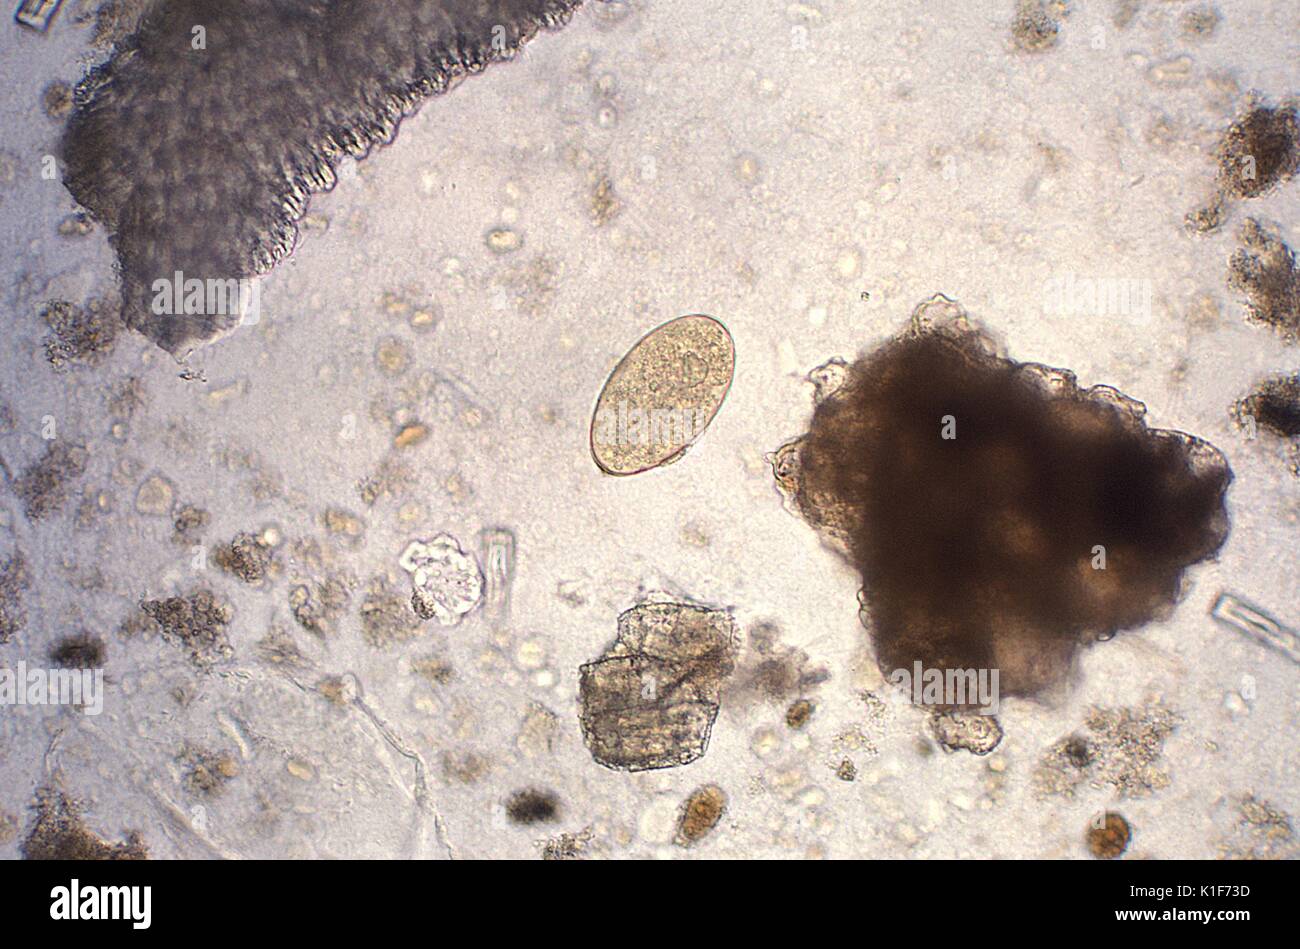 Magnified 128X, this photomicrograph revealed the presence of a trematode, Fasciola hepatica, or ?sheep liver fluke?, egg, which is described as broadly ellipsoidal, operculated, and measure 130{micro}m to 150{micro}m long by 60{micro}m to 90{micro}m wide. The eggs are unembryonated when passed in feces. The eggs of F. hepatica can be difficult to distinguish from Fasciolopsis spp. although the abopercular end of the former often has a roughened or irregular area. <b><u>Clinical Features:</u></b>. Image courtesy CDC/Dr. Mae Melvin, 1979. Stock Photo